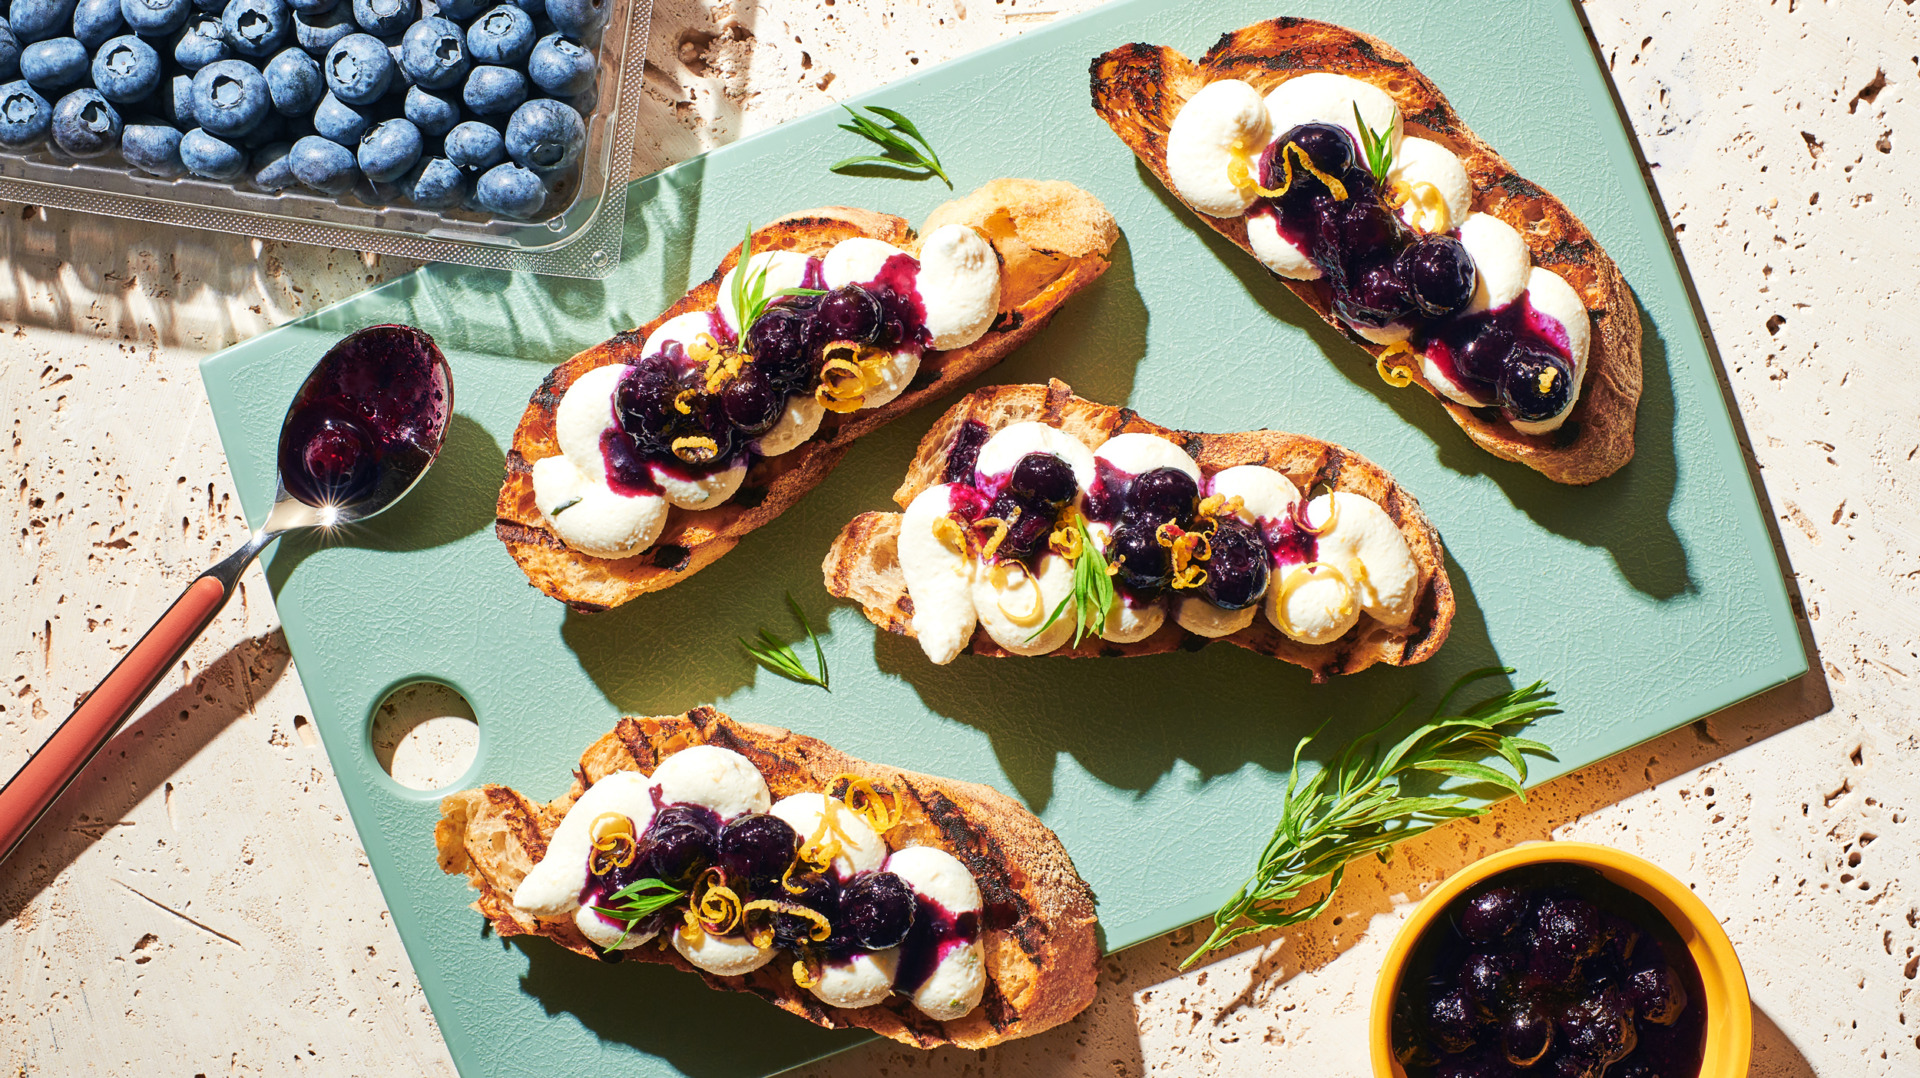 Image of Always Fresh Blueberry and Whipped Ricotta Grilled Bruschetta with a tray of Always Fresh